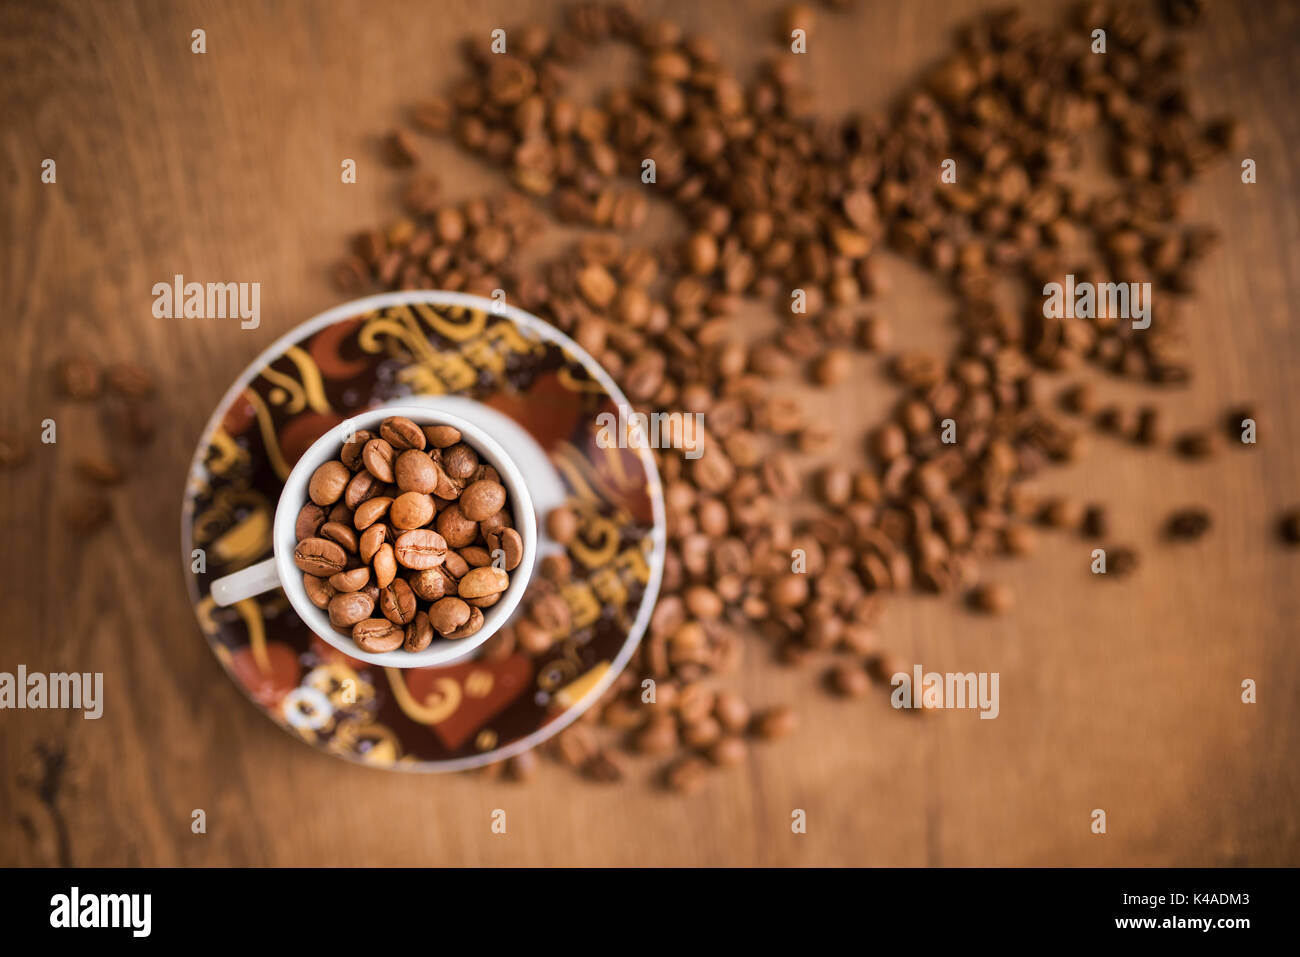 coffee cup and coffee beans on wooden table Stock Photo